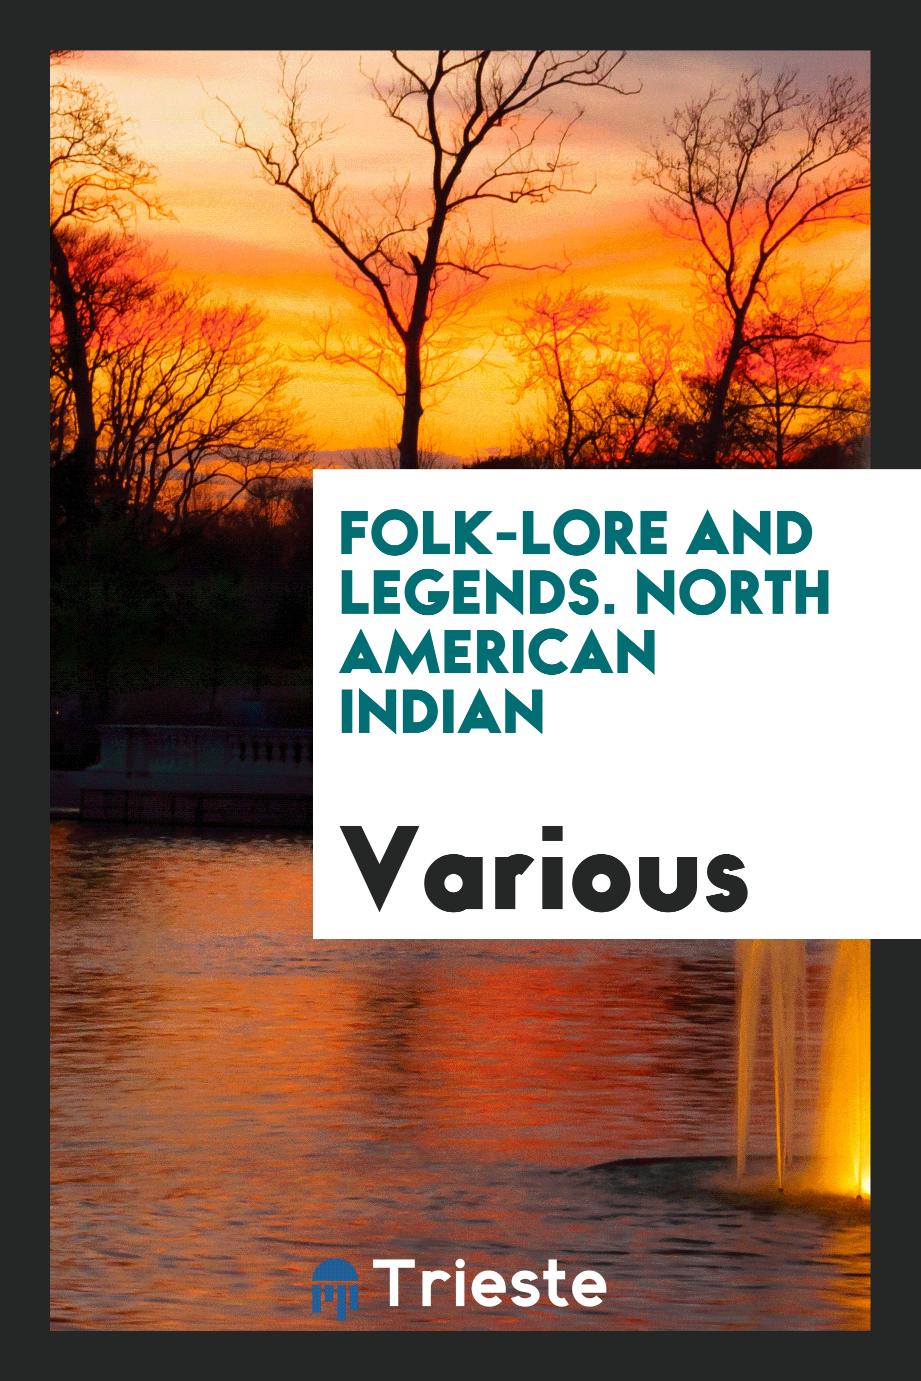 Folk-lore and legends. North American Indian